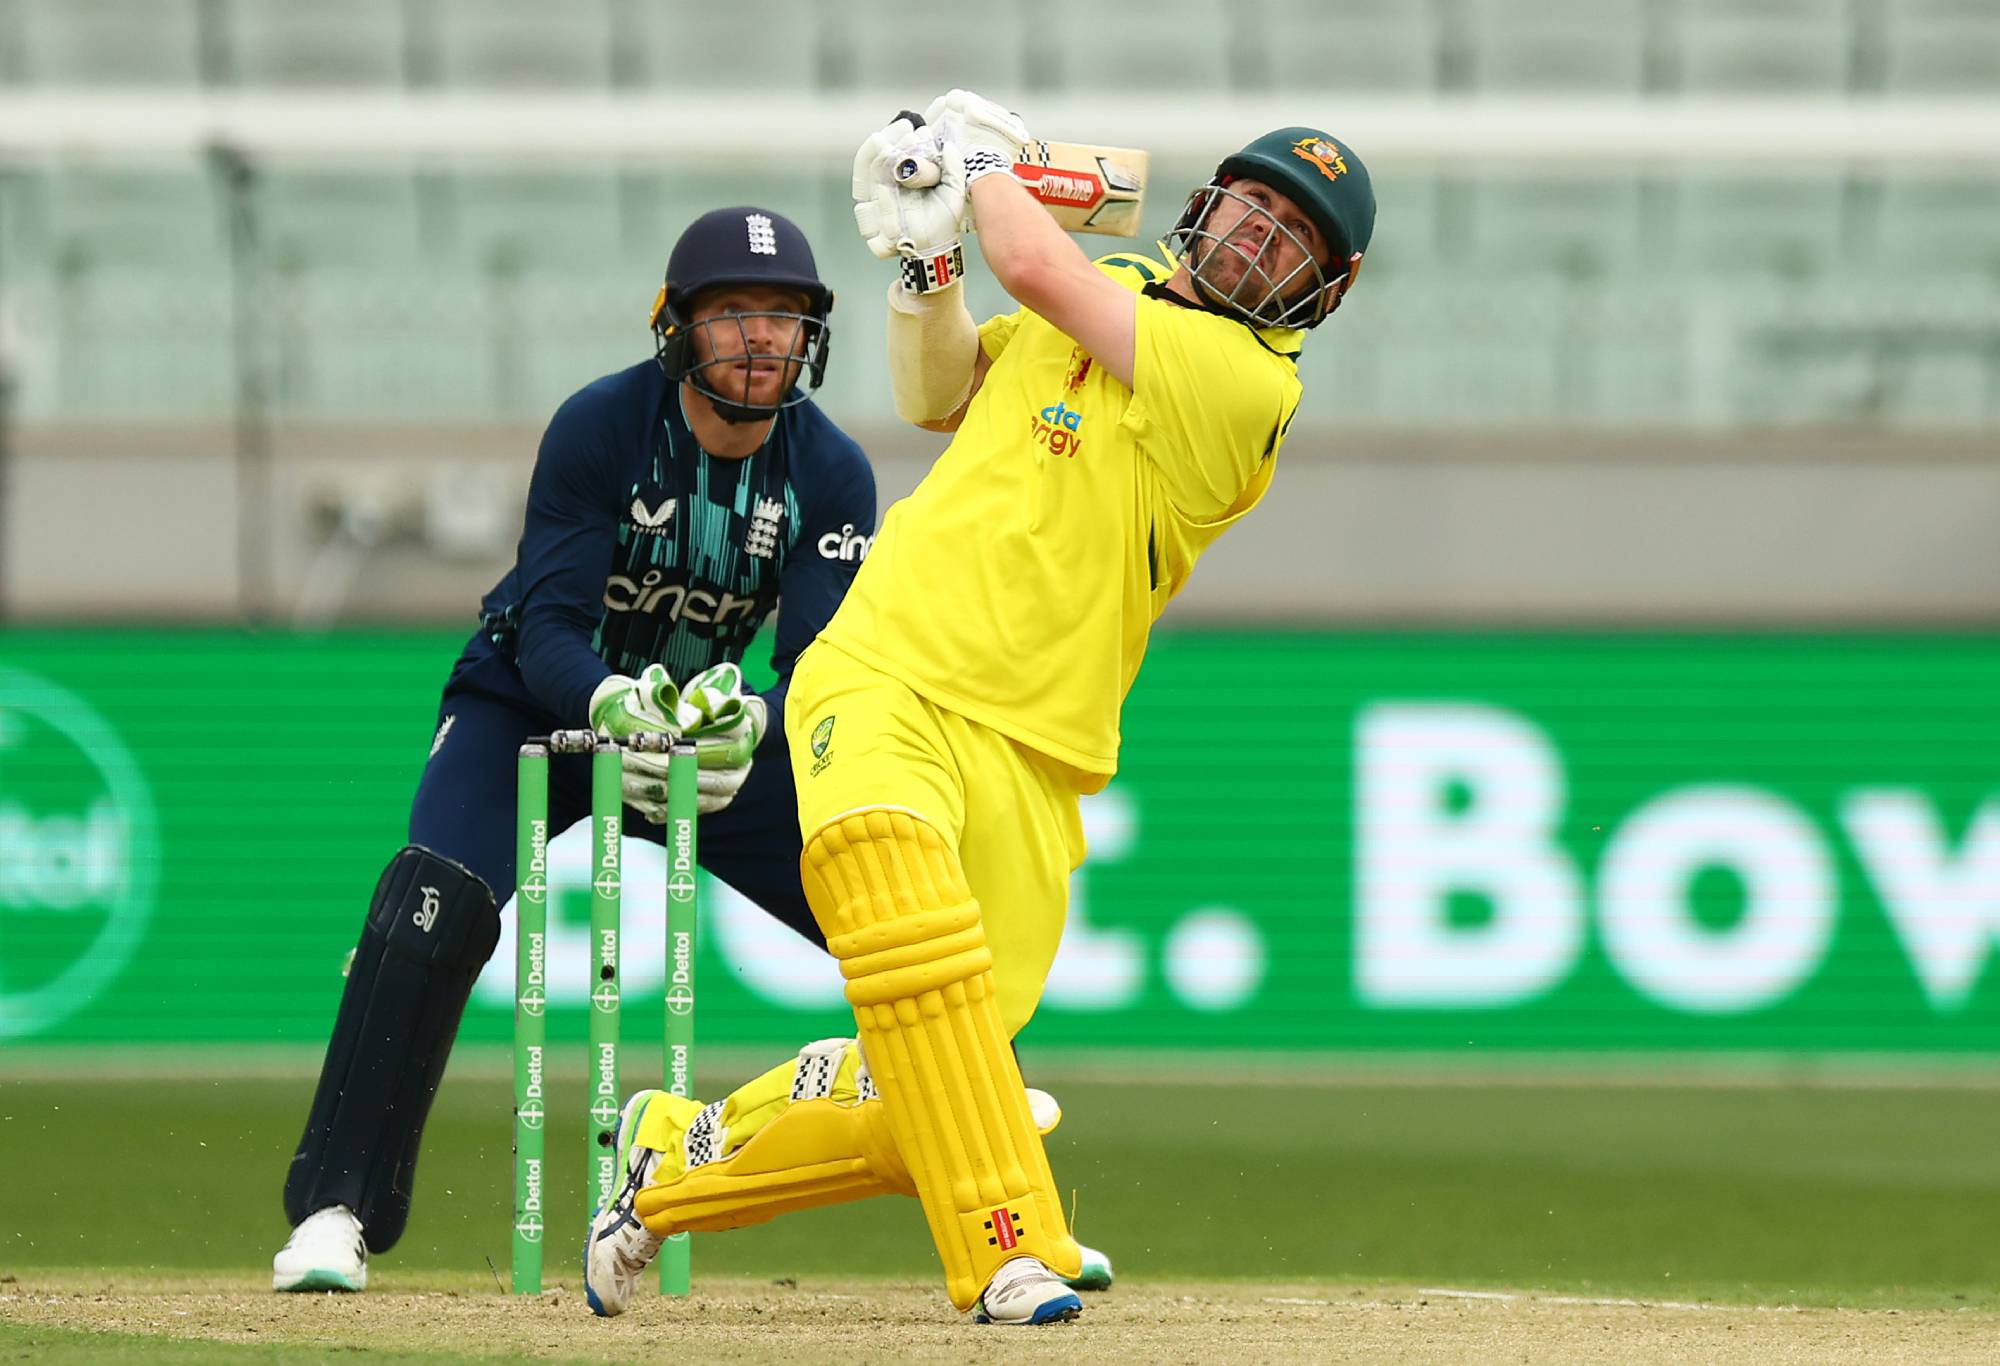 MELBOURNE, AUSTRALIA - NOVEMBER 22: Travis Head of Australia defeats during game three of the One Day International series between Australia and England at Melbourne Cricket Ground on November 22, 2022 in Melbourne, Australia.  (Photo by Graham Denholm - CA/Cricket Australia via Getty Images)